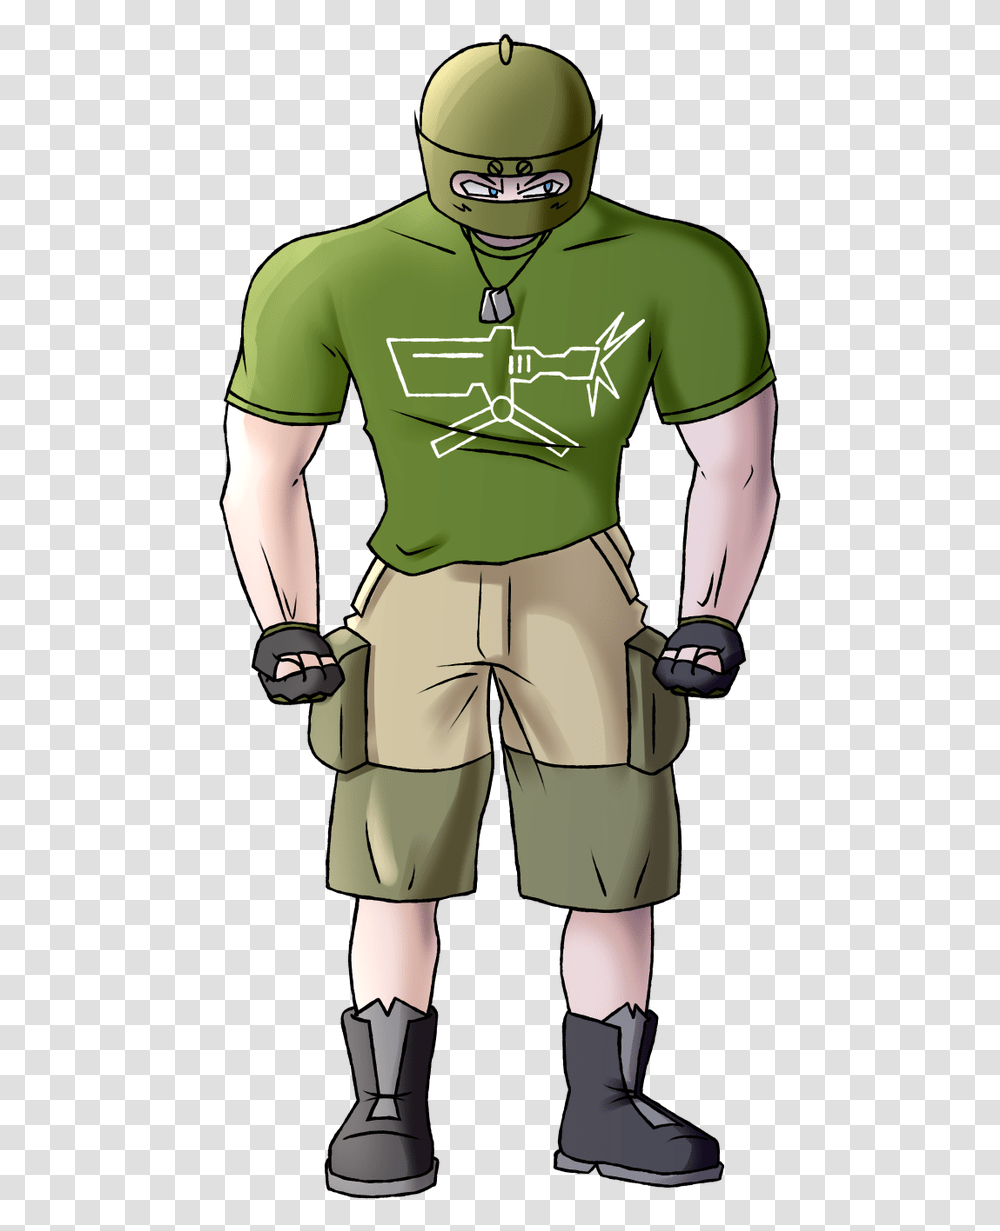 Download Tachanka Pokemon Trainer Commission For A Good Bud Cartoon, Helmet, Clothing, Person, Shorts Transparent Png